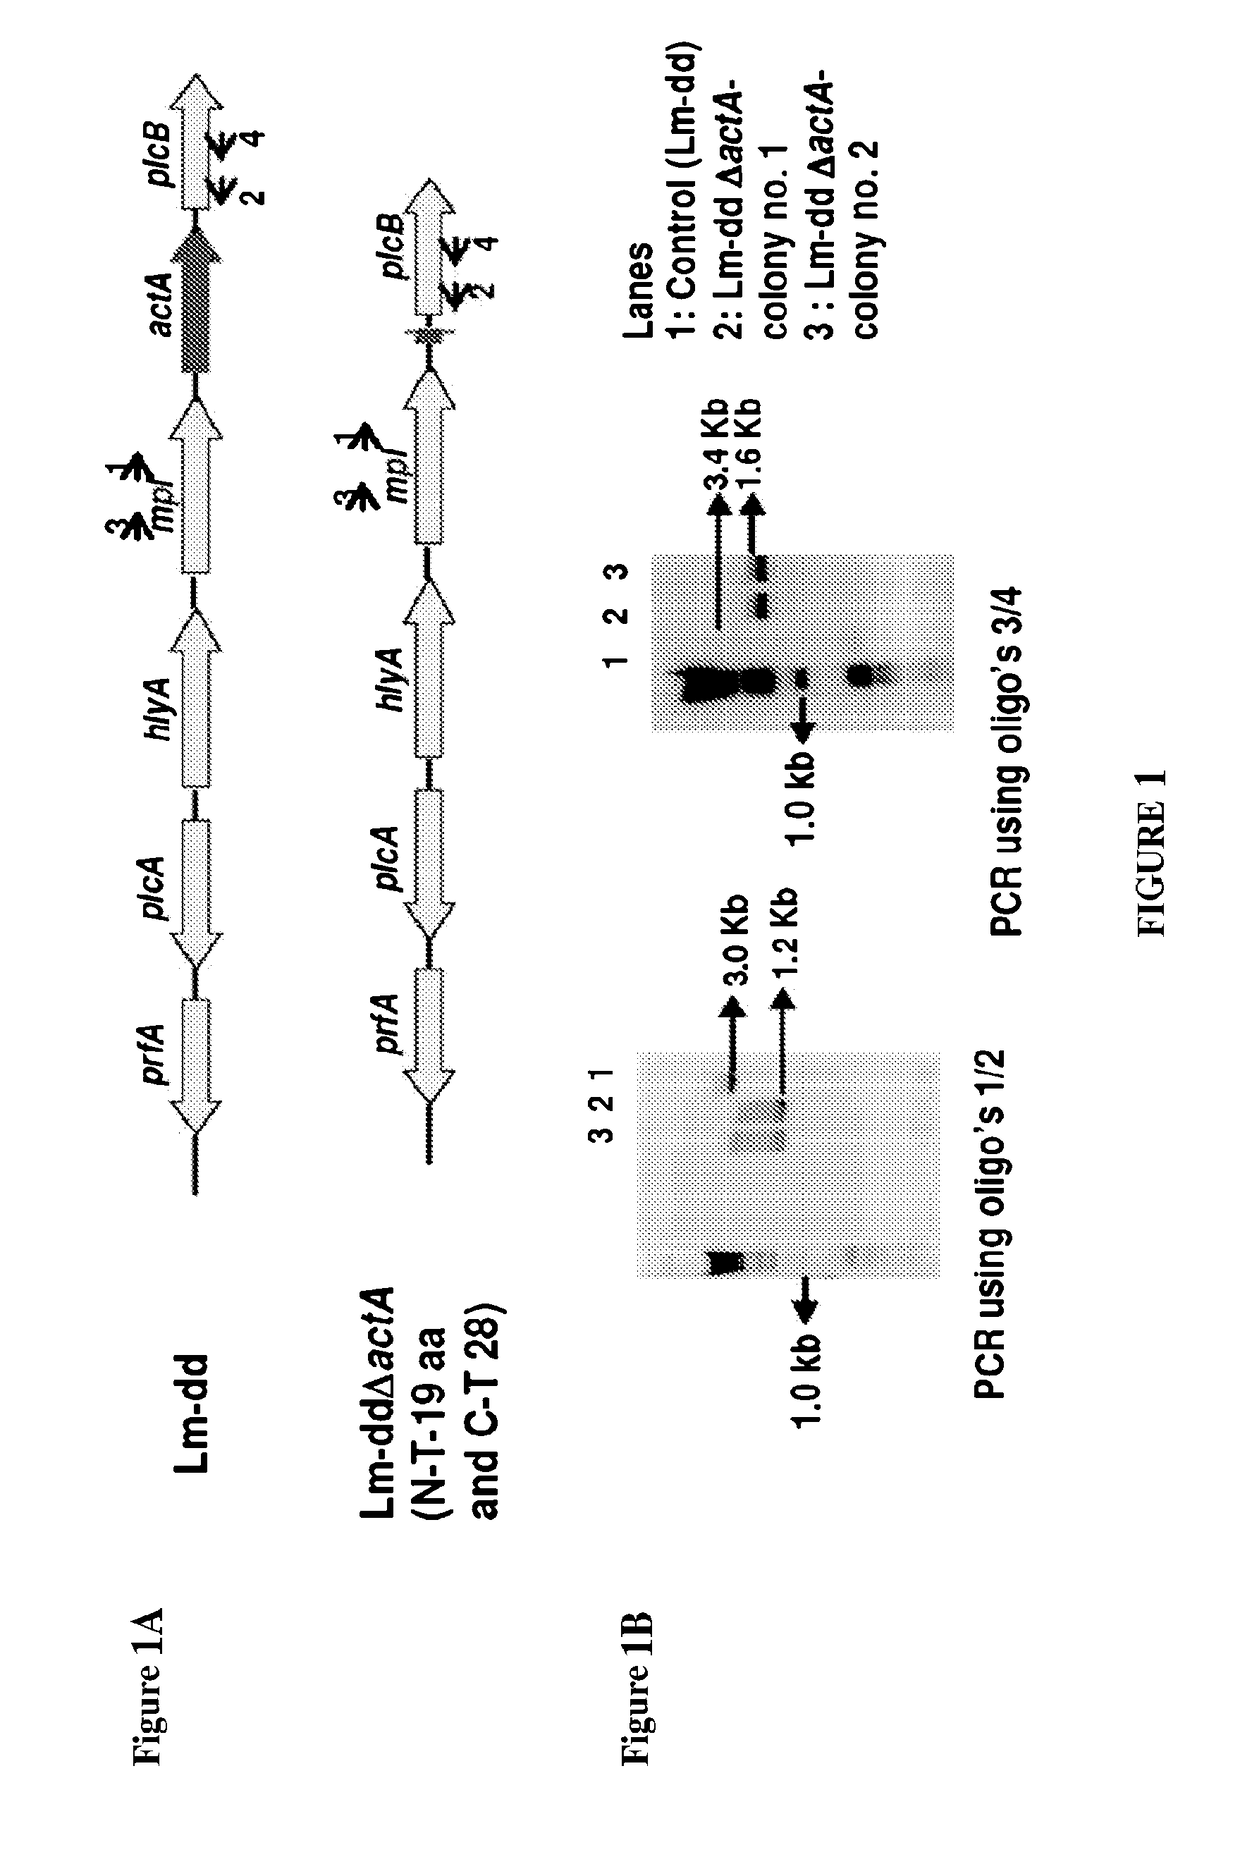 Manufacturing device and method of an immunotherapeutic formulation comprising a recombinant listeria strain